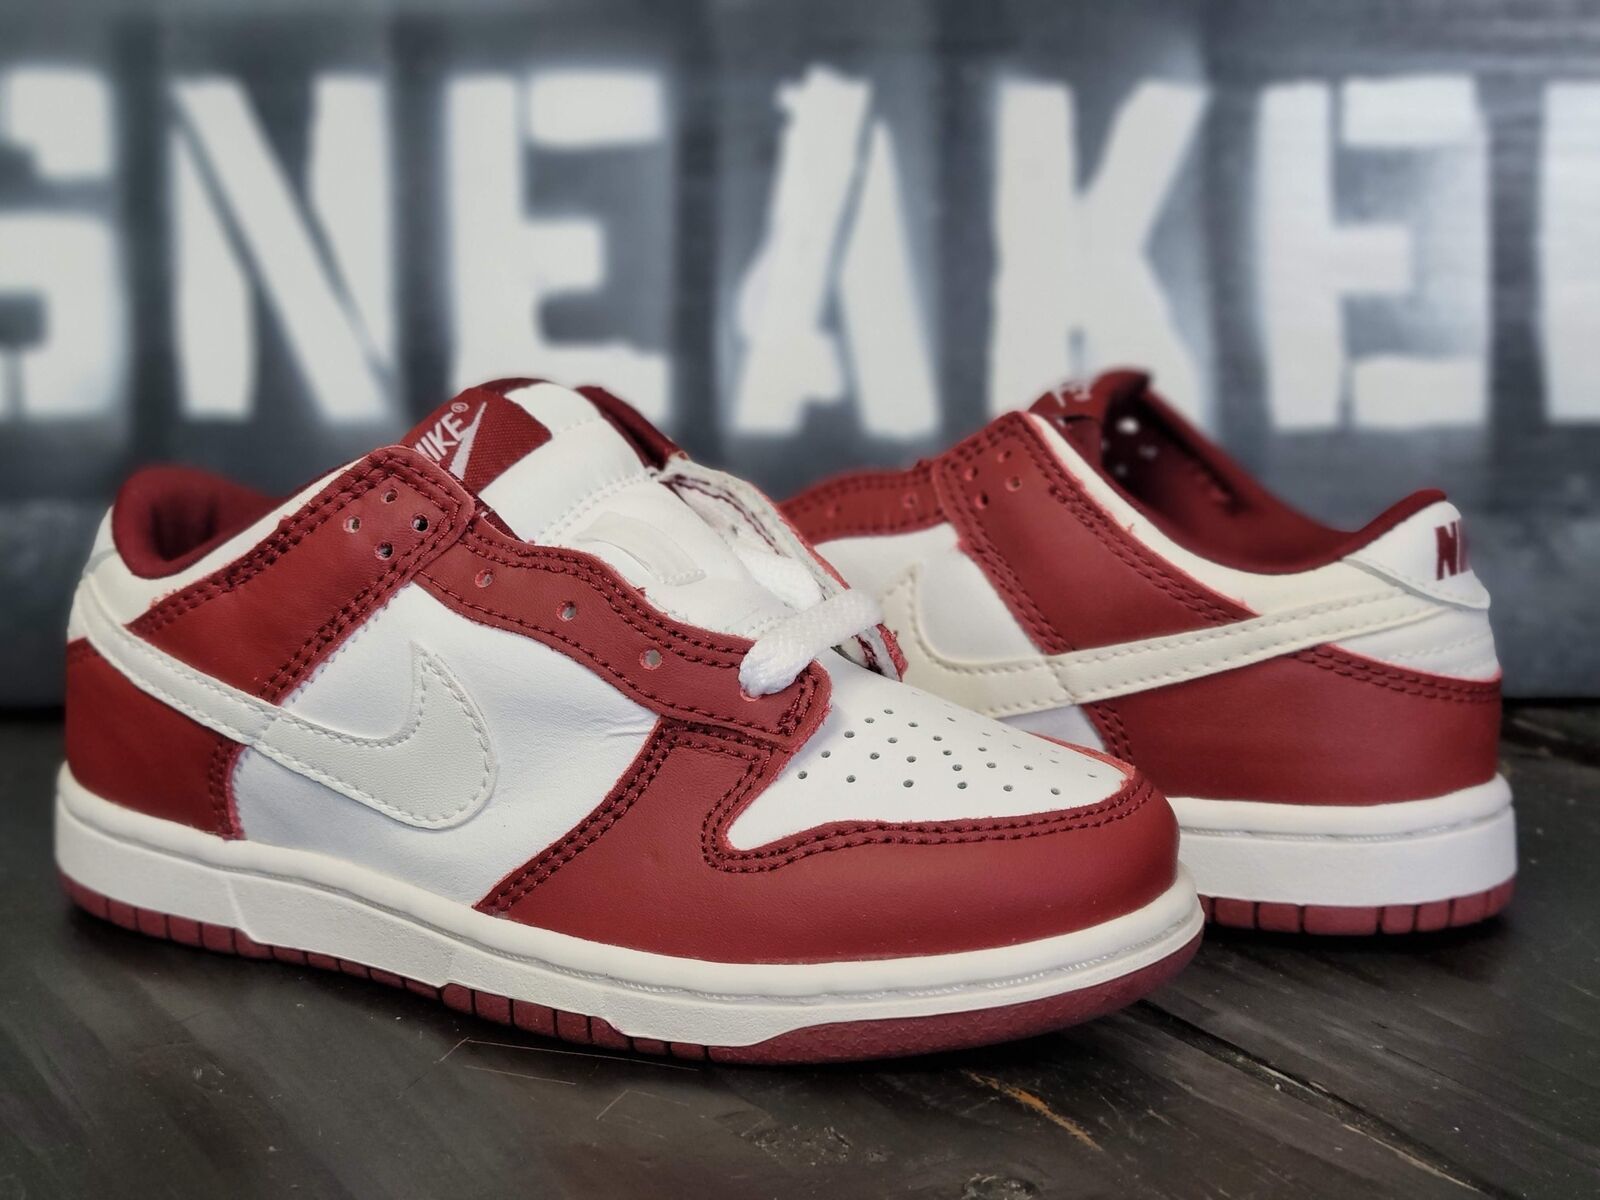 2003 Nike Dunk Low PS Team Red/White Shoes 305044-613 Kid/Toddler 12.5c - $116.88